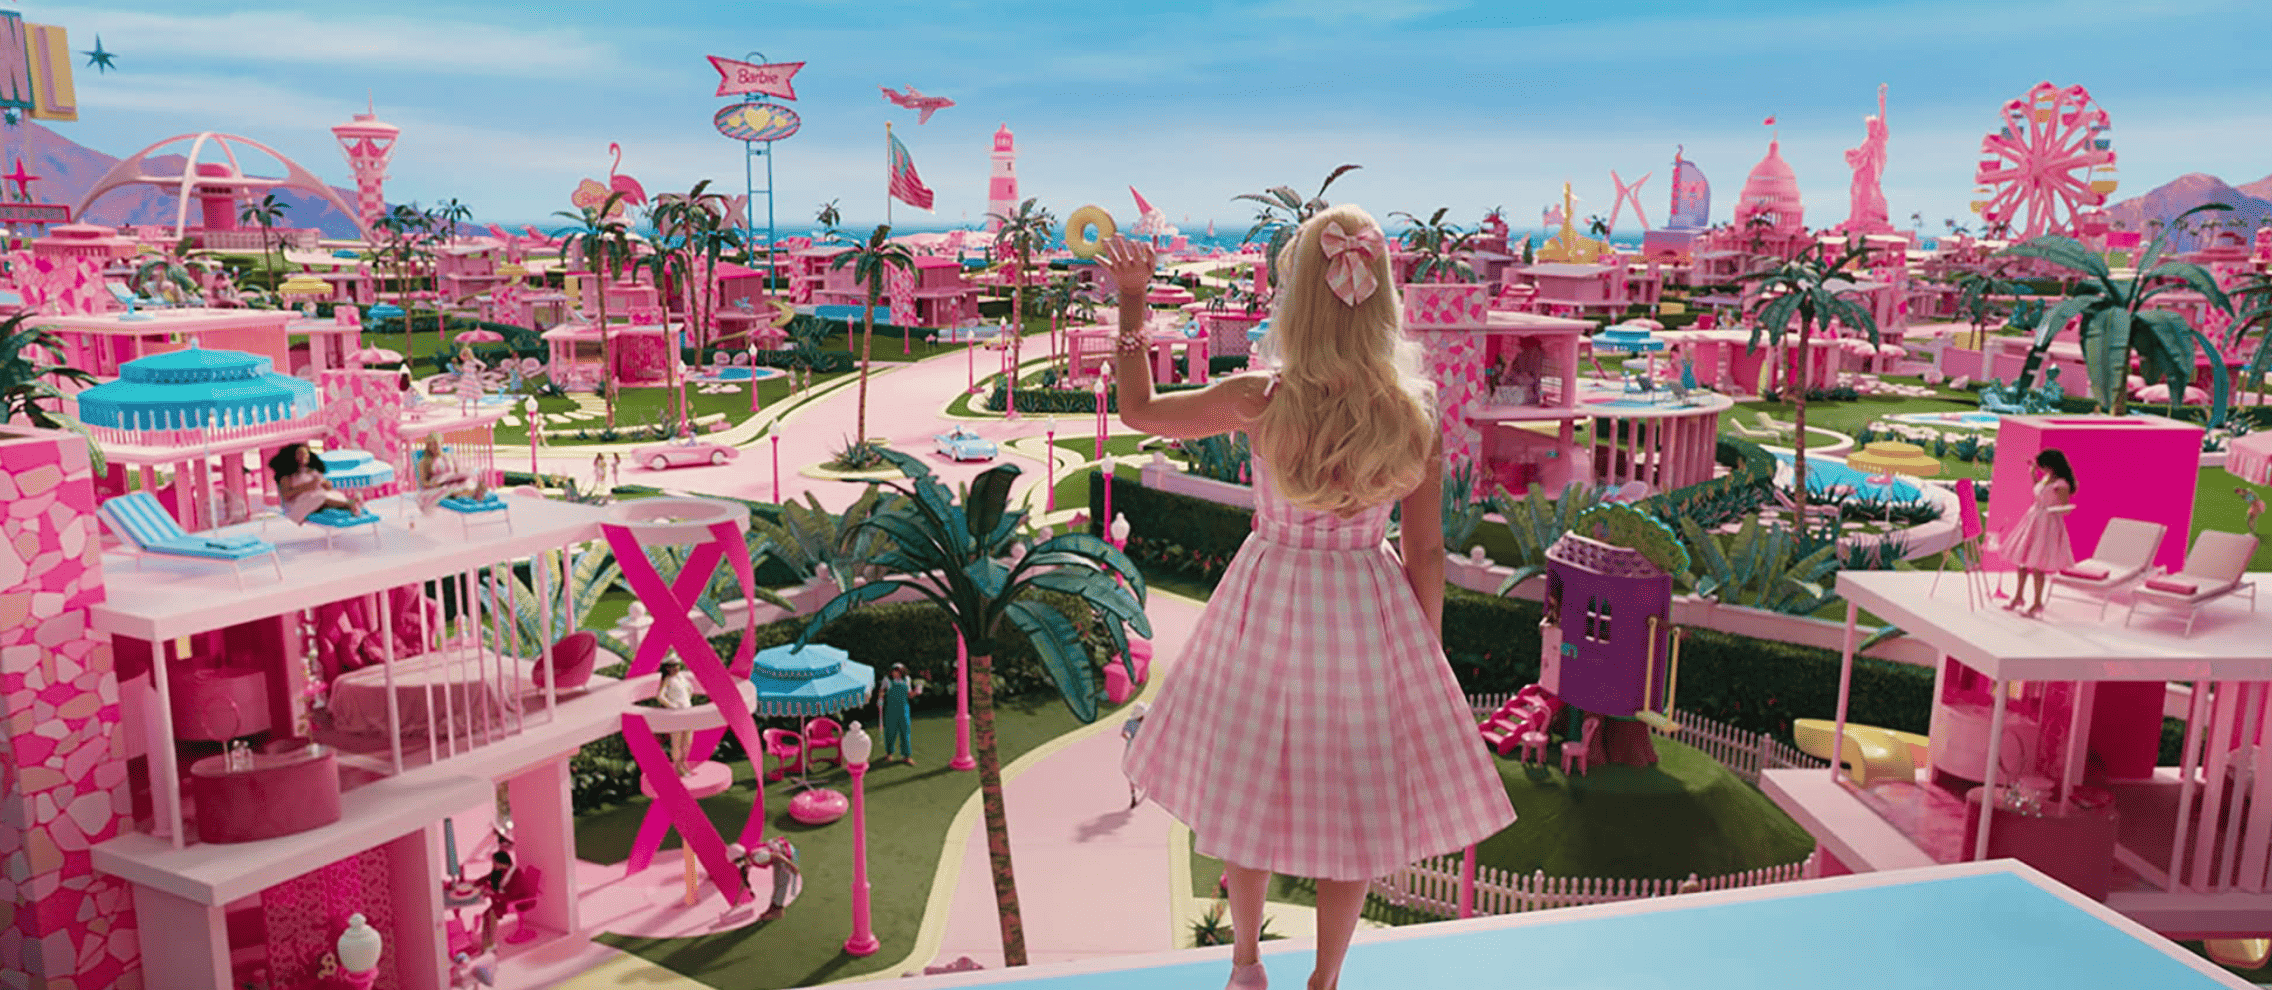 Barbie (Margot Robbie) with her back turned to the camera stands on a roof overlooking Barbie Land, a collection of doll houses and props predominantly in a bright pink color in this image from HeyDay Films.